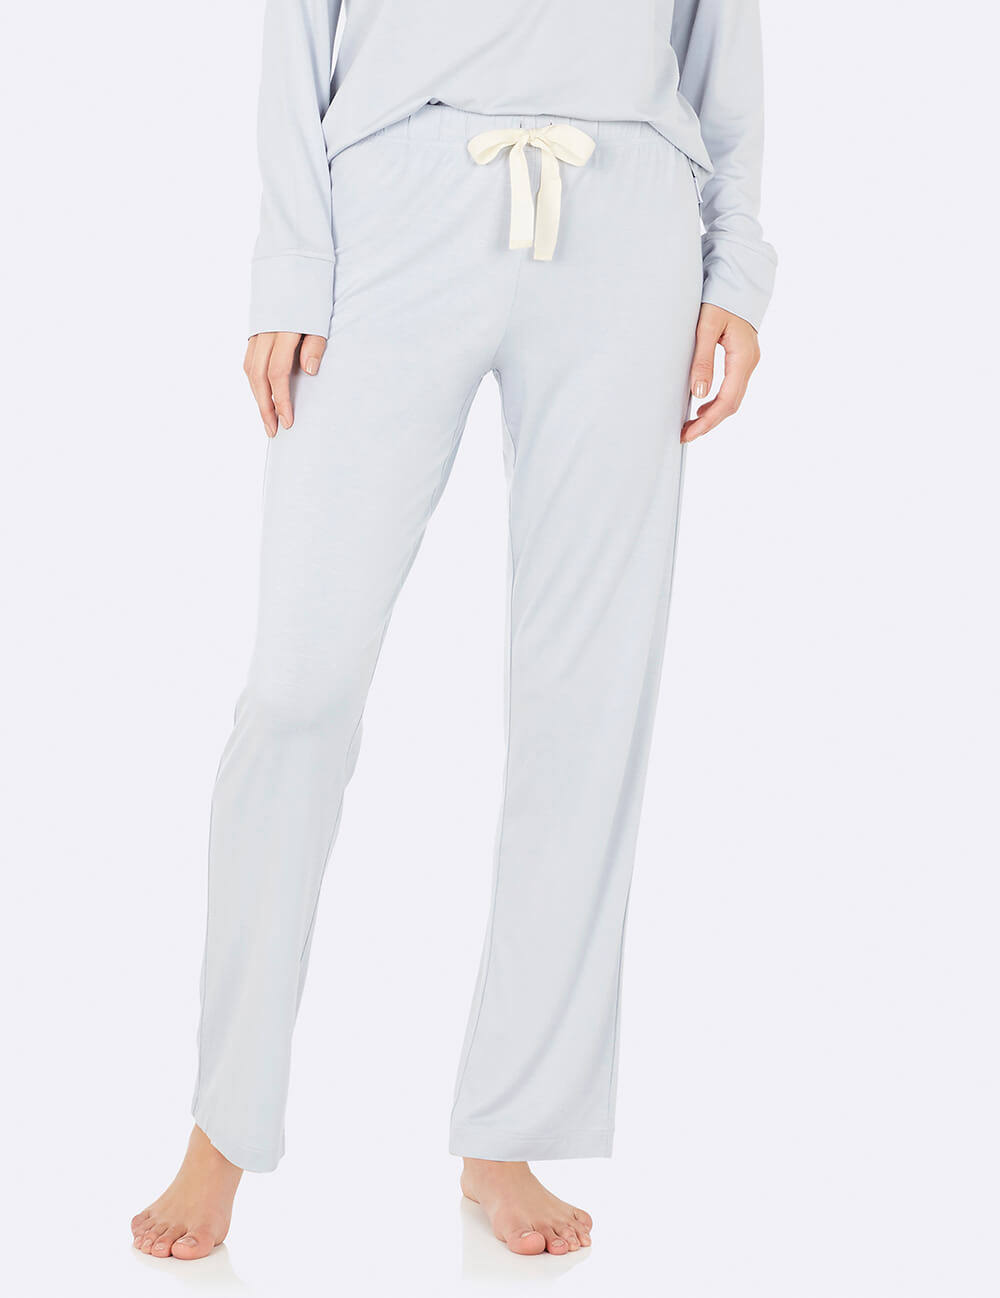 Boody | Goodnight Sleep Pant in Dove | Size XL